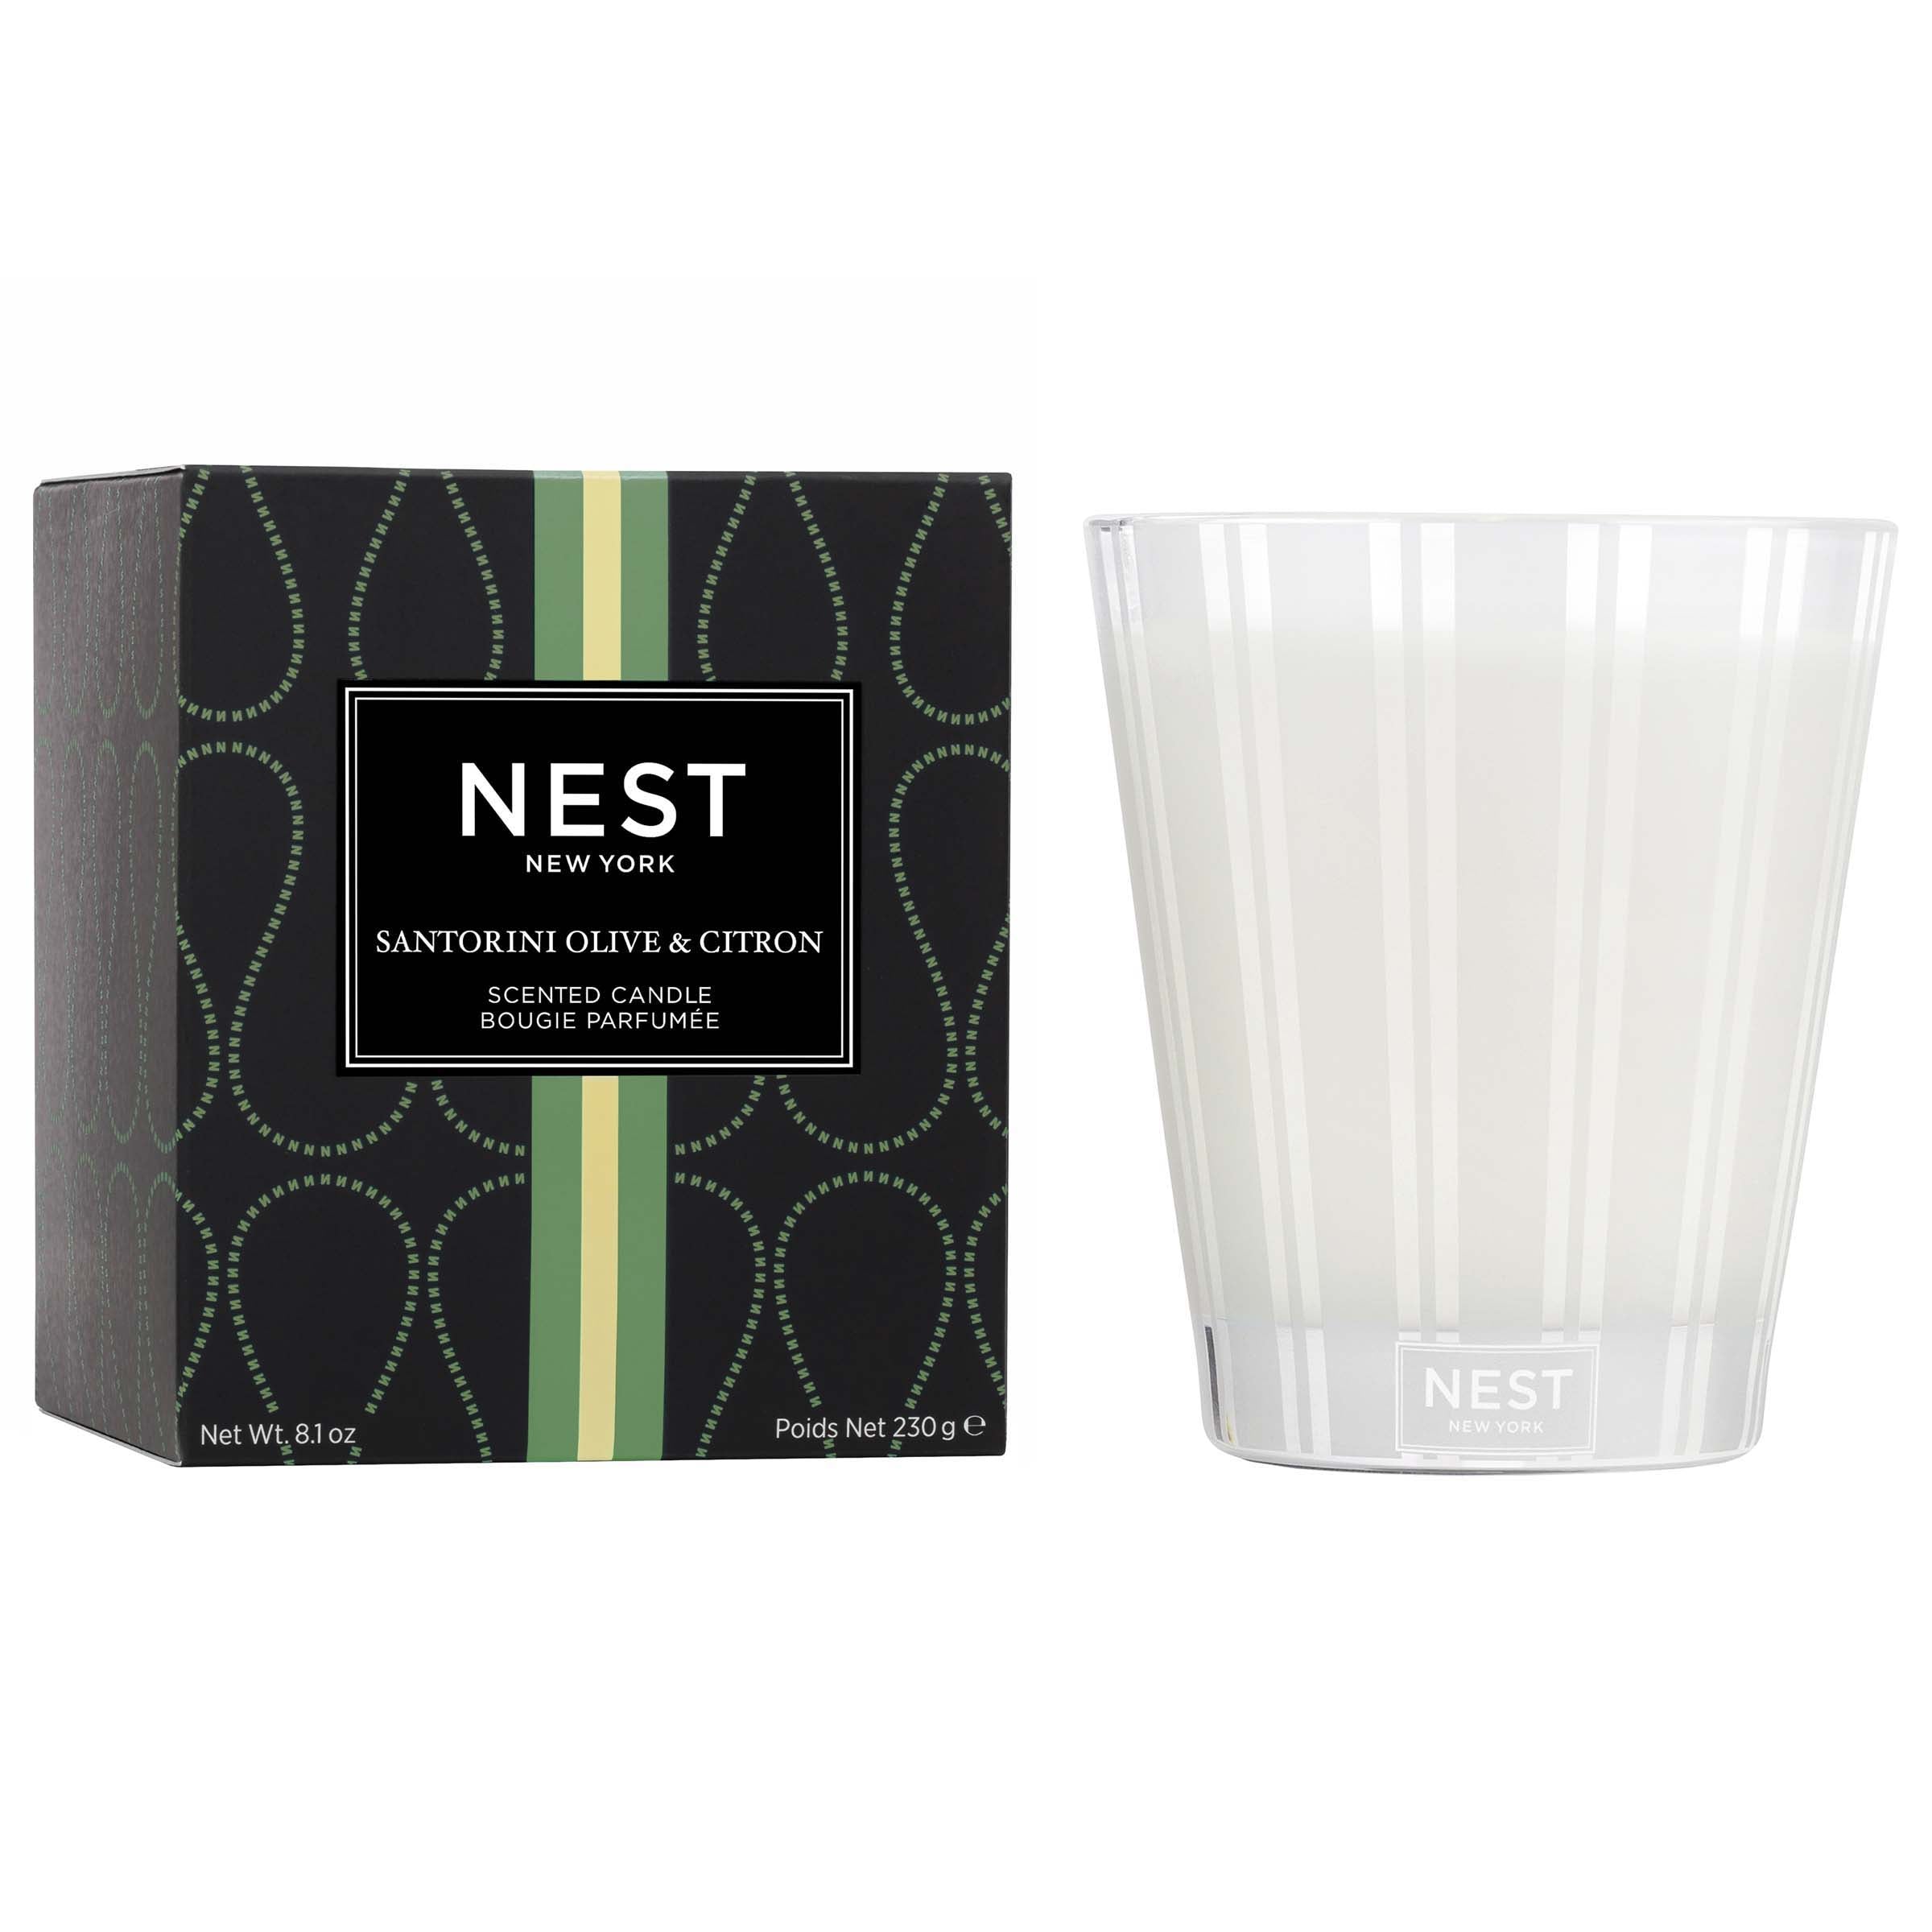 Santorini Olive & Citron Classic Candle 8.1 oz by Nest New York







